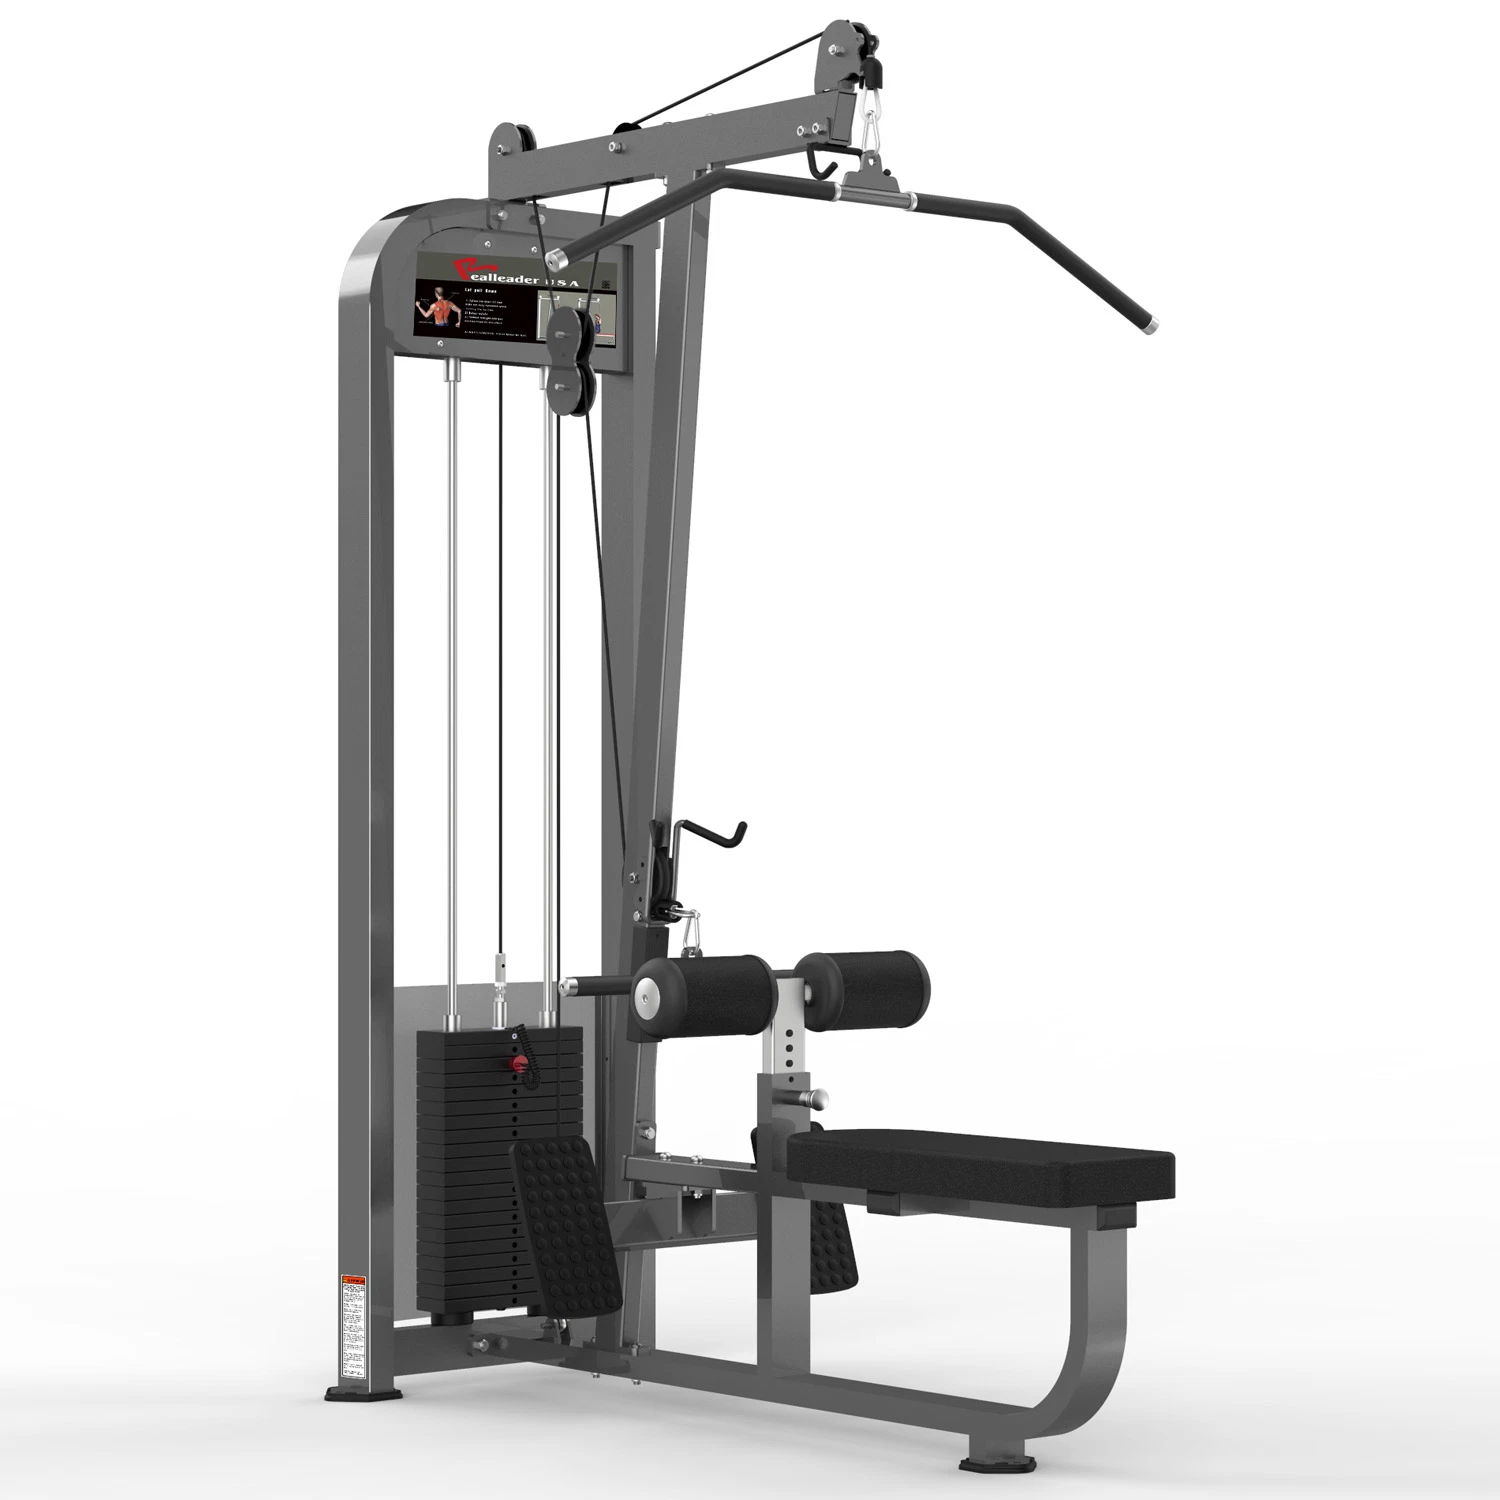 Realleader New Design Multi-Functional Gym Equipment Sports Exercise Strength Lat Pull Down Trainer